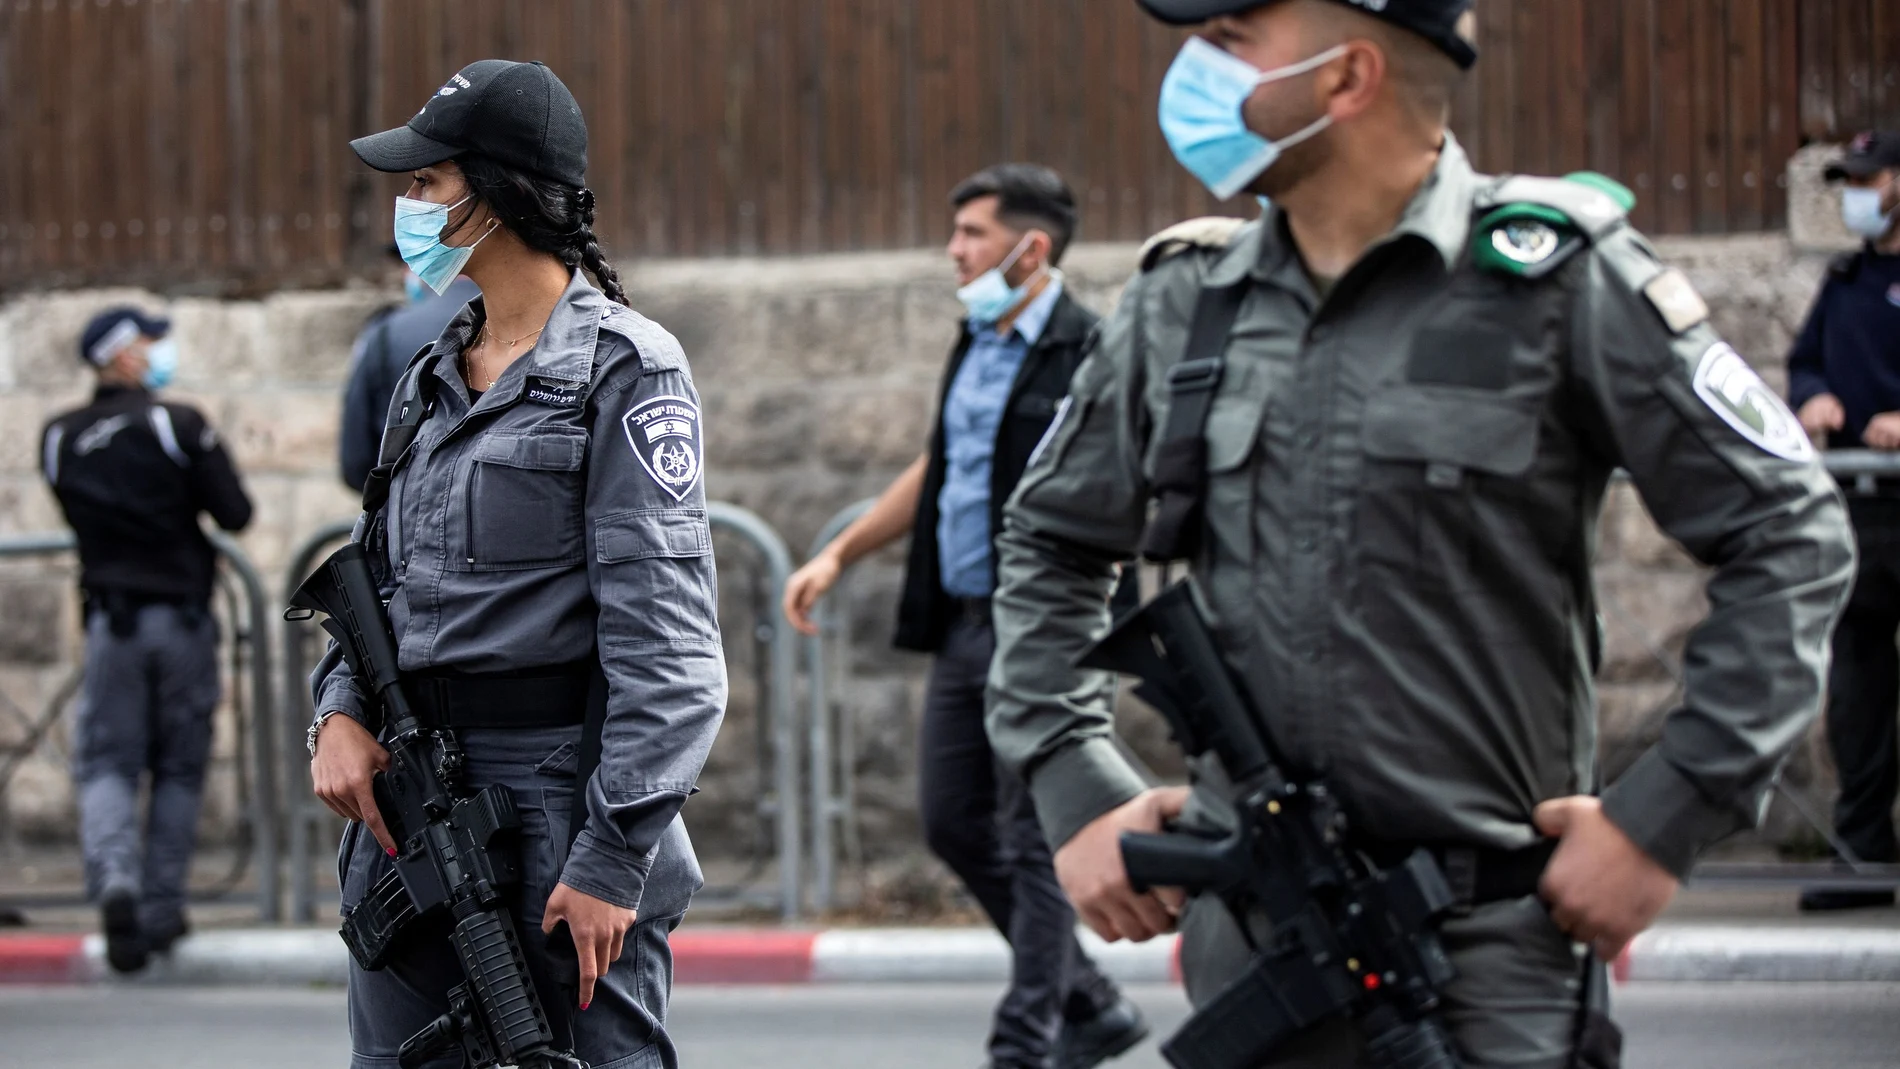 Israeli border police and police keep watch as supporters of Israeli Prime Minister Benjamin Netanyahu protest outside the Prime Minister's Residence in Jerusalem